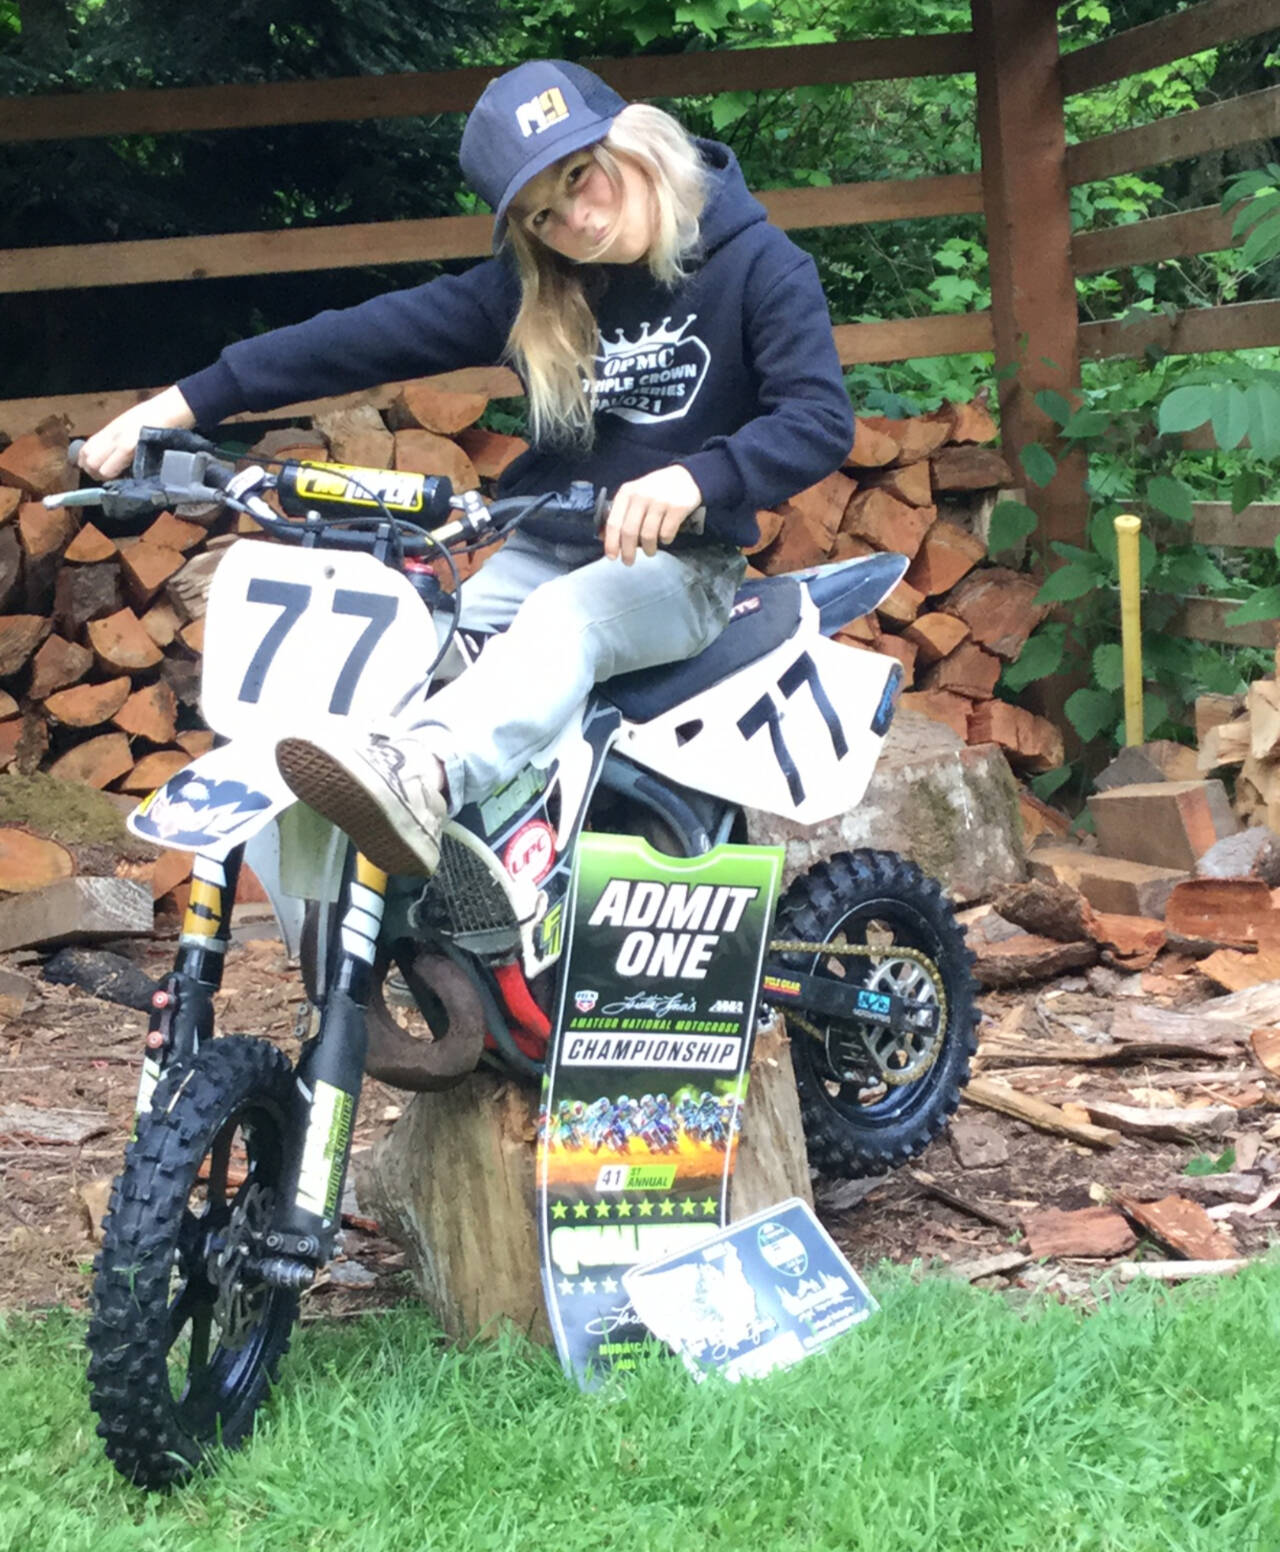 Skagit Williams, 9, of Joyce, qualified to race at the Monster Energy Amateur National Motocross Championship in Hurricane Mills, Tenn., in August. (Courtesy photo)